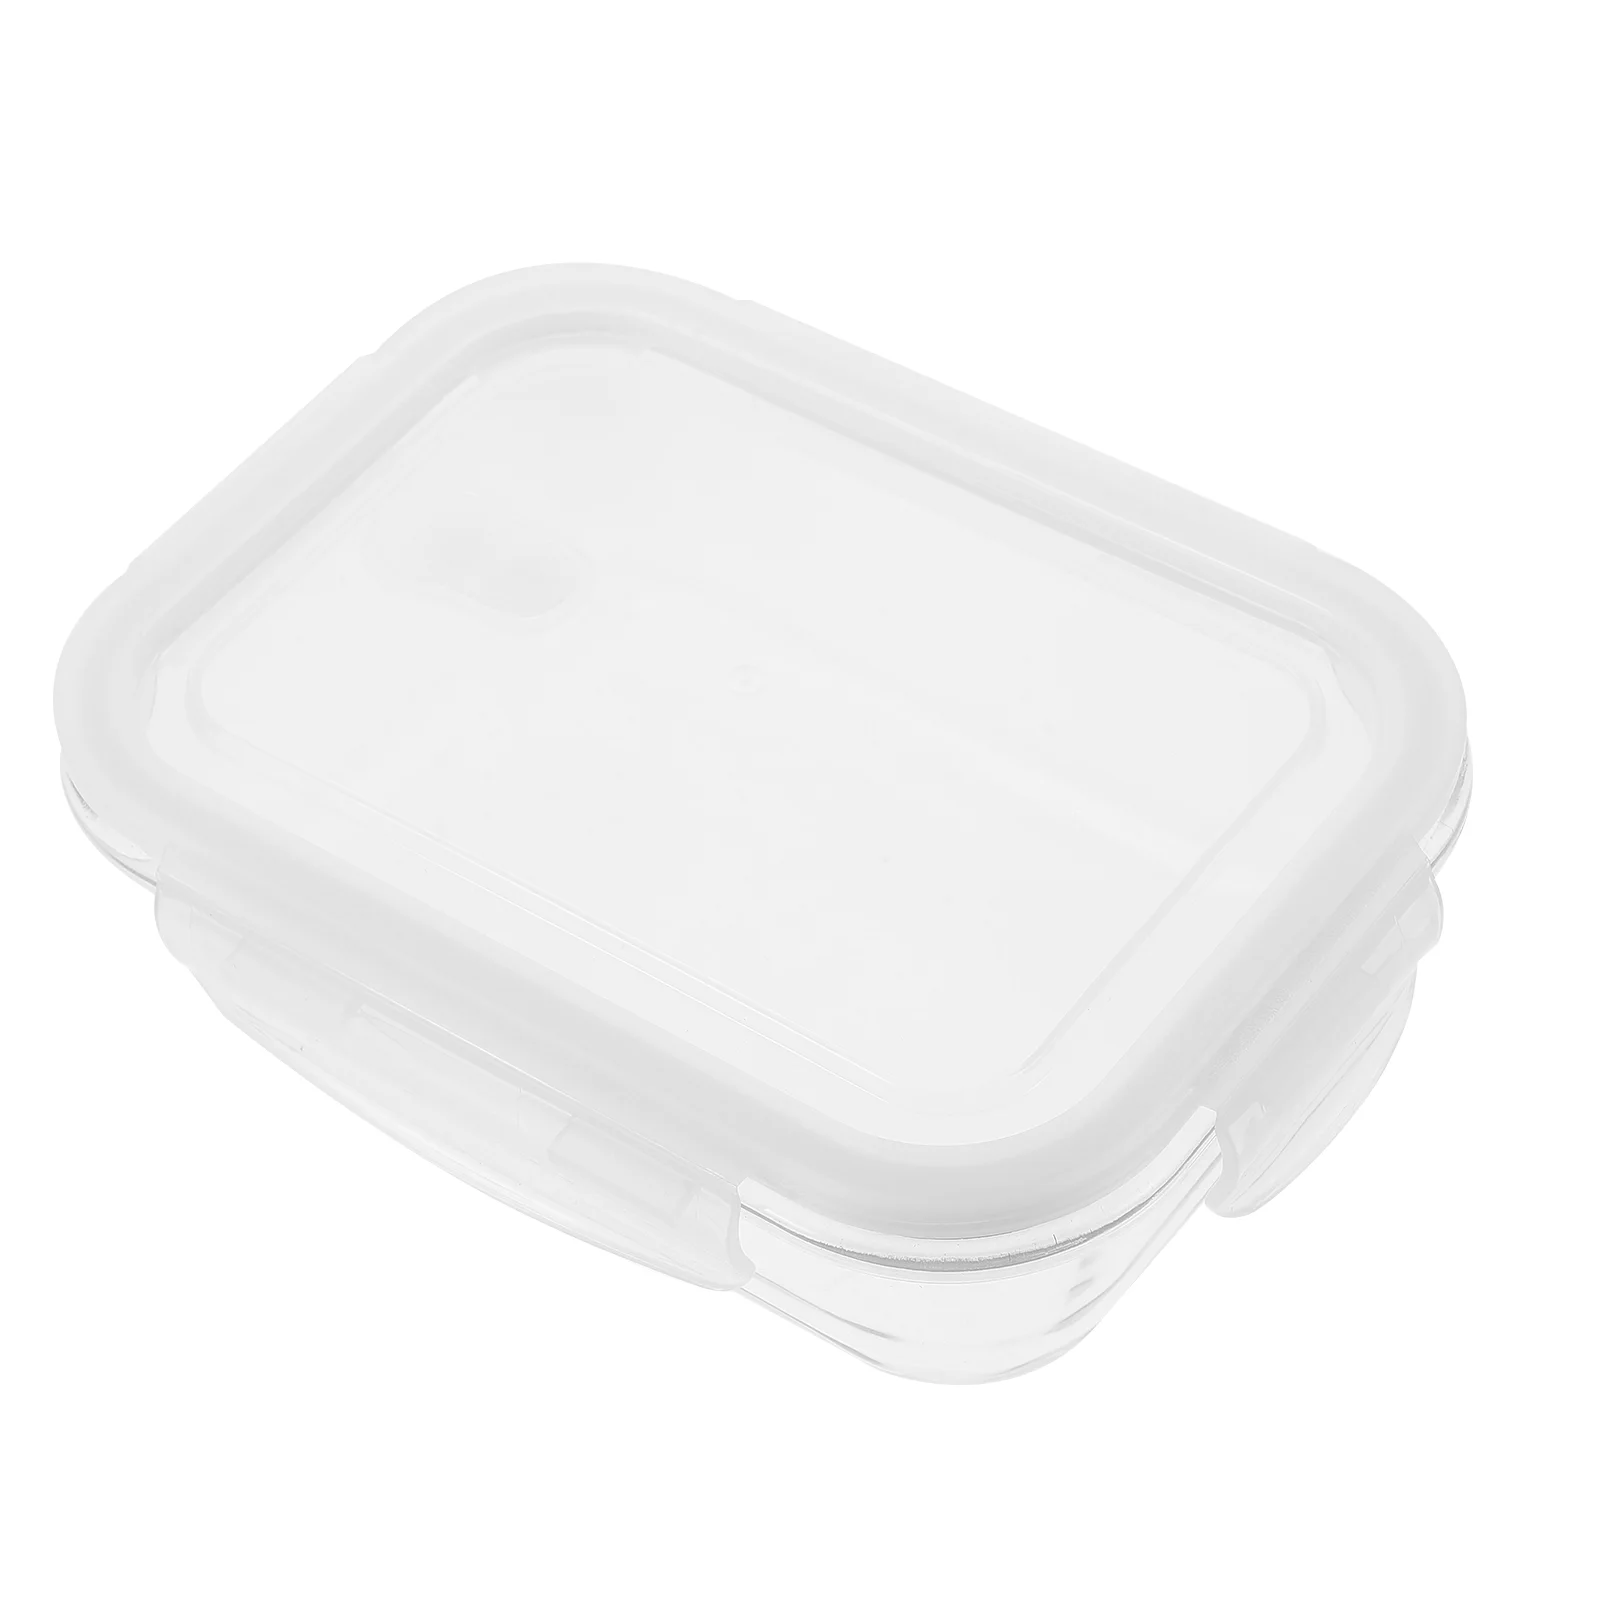 

Fridge Containers Snacks Portable Food Meal Prep Glass Lids Convenient Refrigerator Lunch Kitchen Student